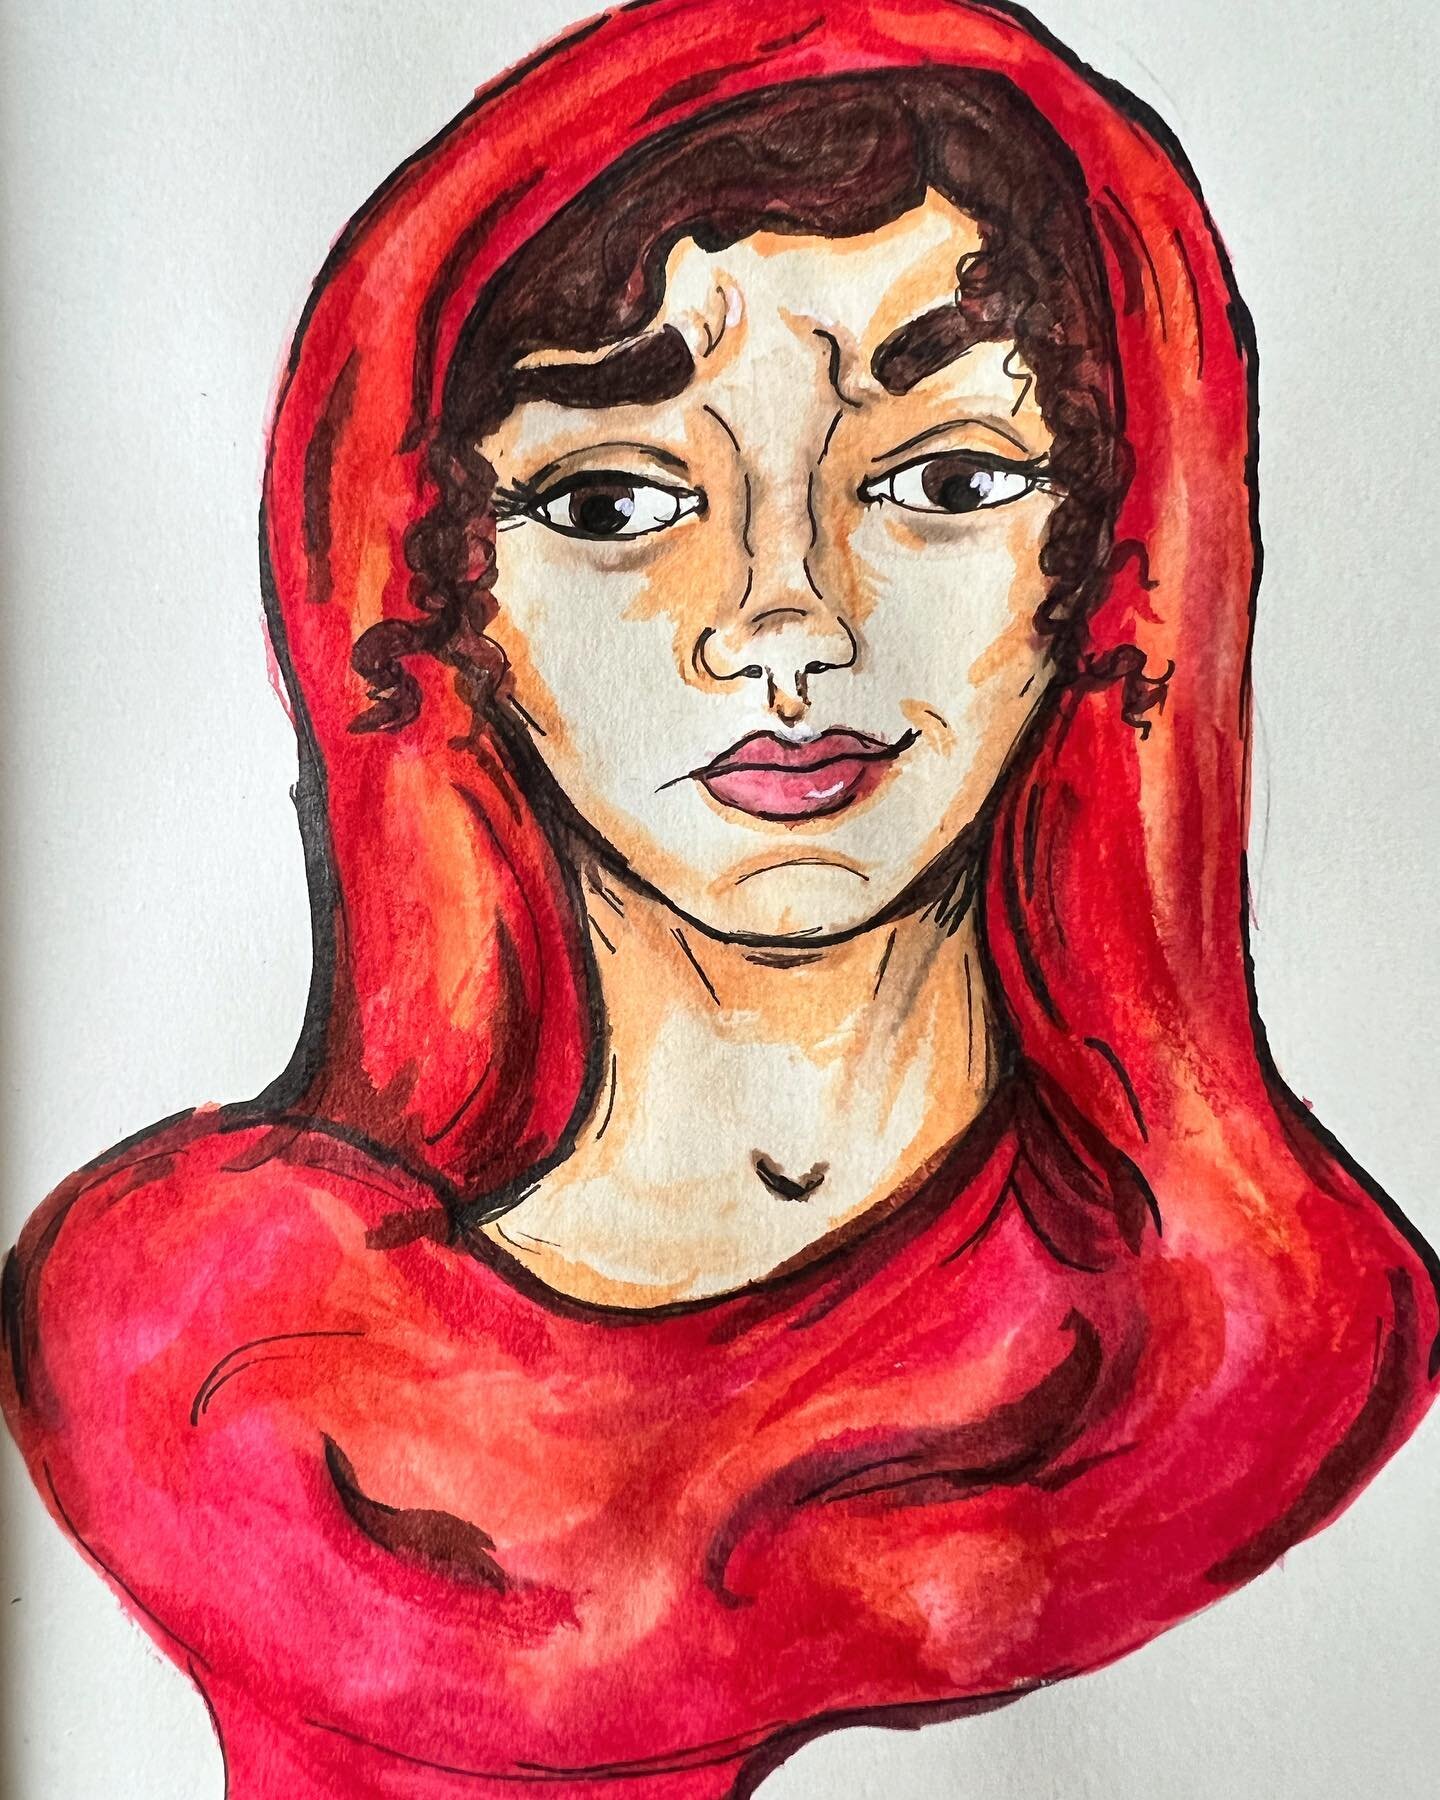 Been experimenting more with #ink and #watercolor and I&rsquo;m loving the results. It&rsquo;s been a journey finding the mediums that best fit my style! This is my favorite part of visual arts: the experimenting and the permission to fuck up. I can&